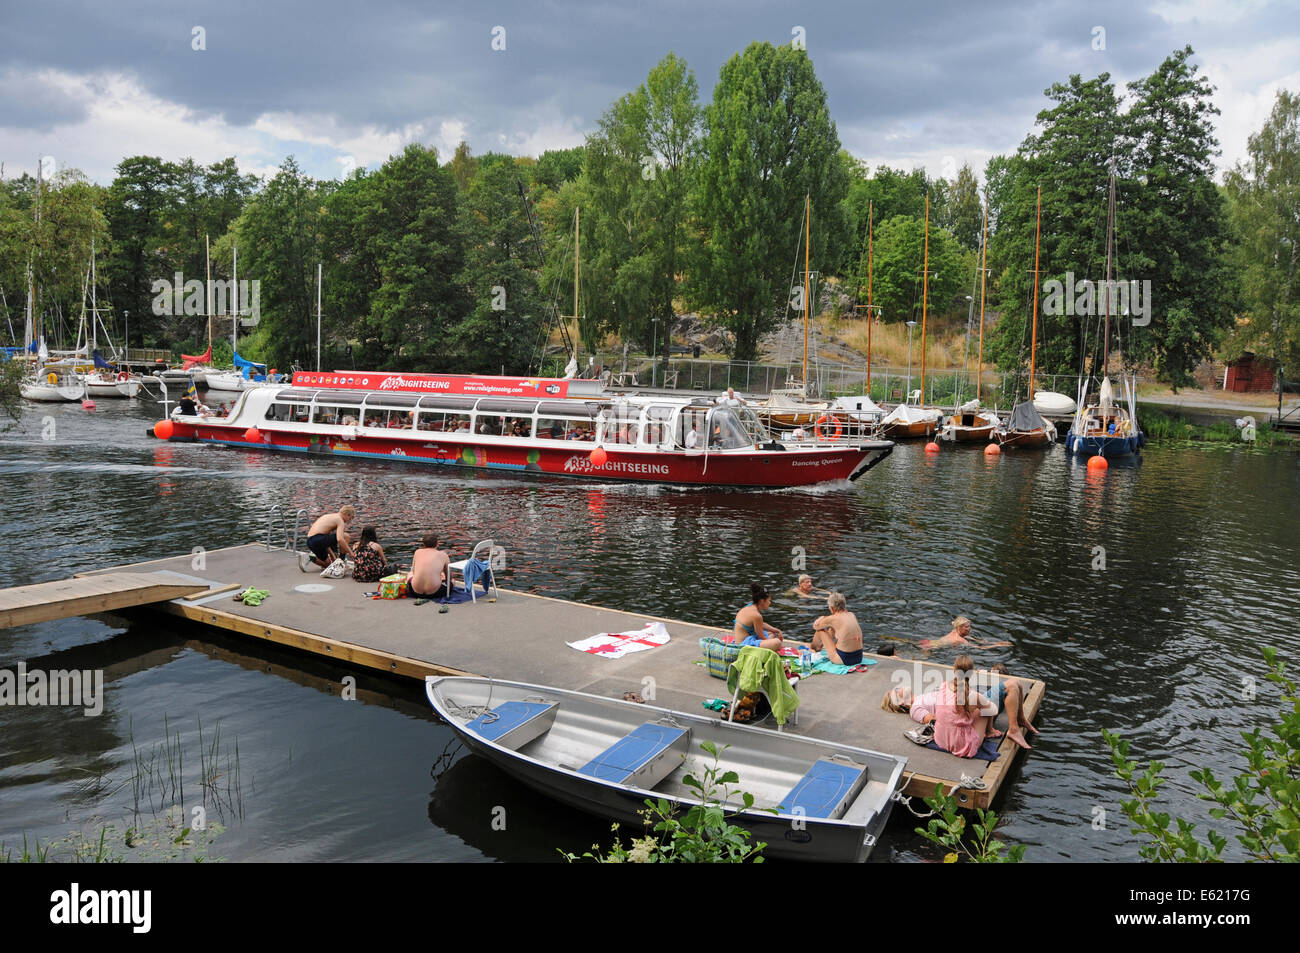 Sightseeing boats and kayakers on Langholmen Långholmen Canal with sunbathers in Stockholm Stock Photo